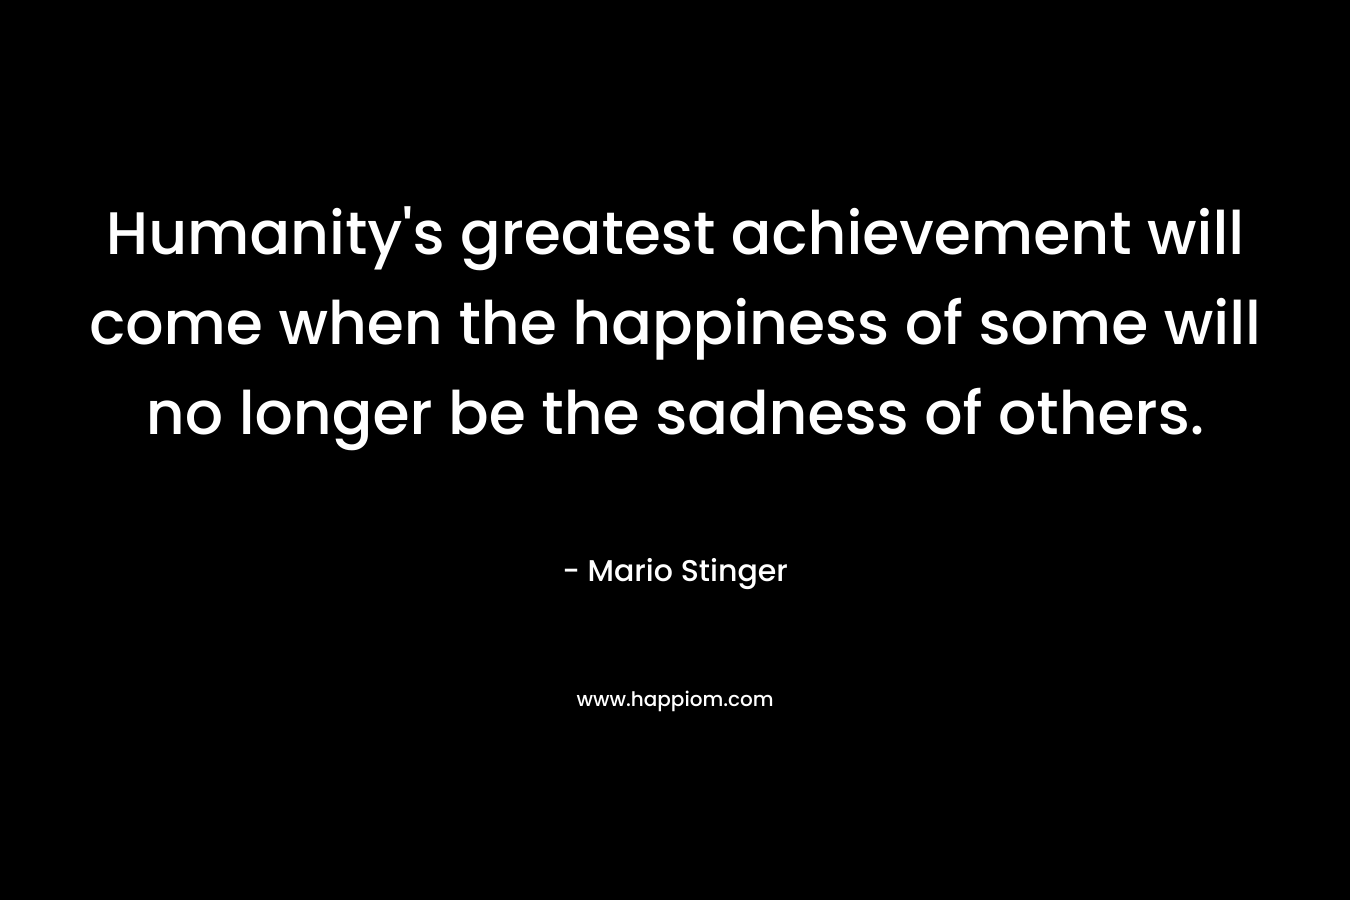 Humanity’s greatest achievement will come when the happiness of some will no longer be the sadness of others. – Mario Stinger